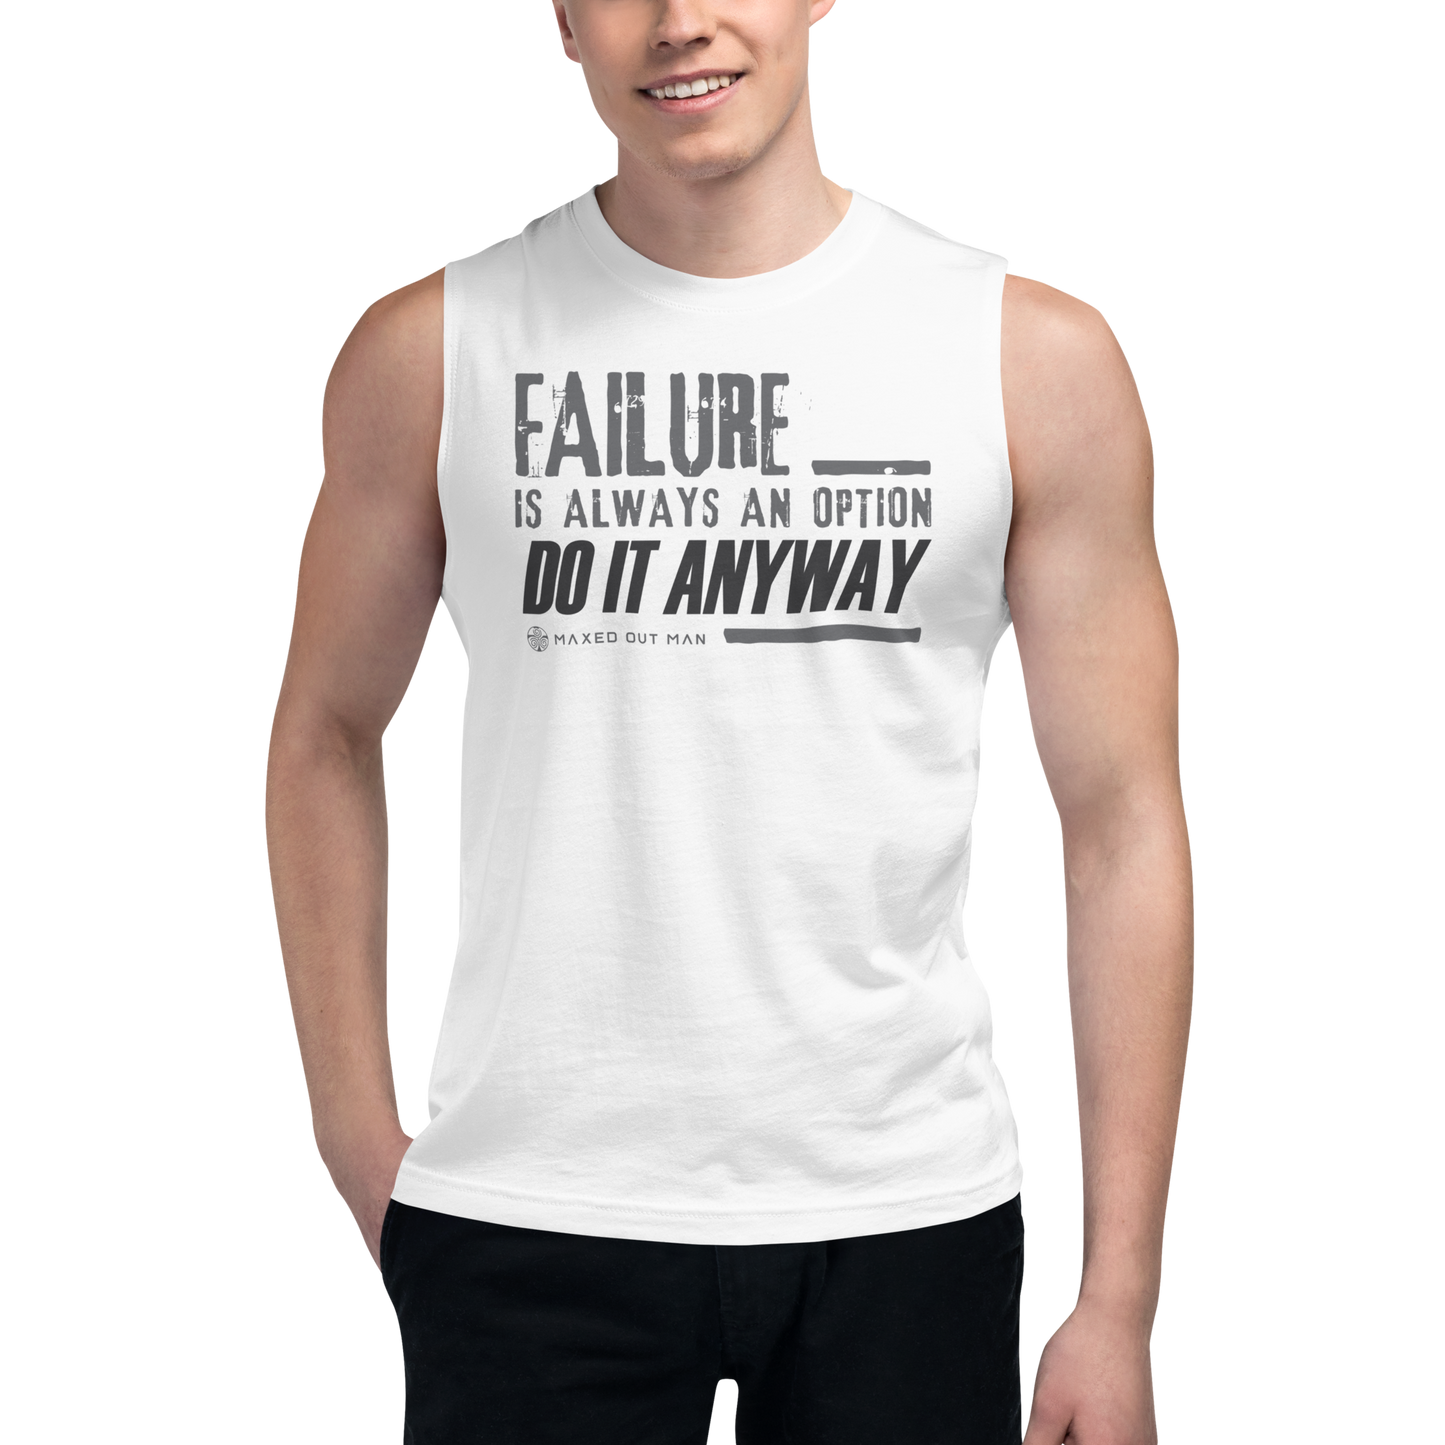 Failure is Always an Option Muscle Shirt - Lighter Colors